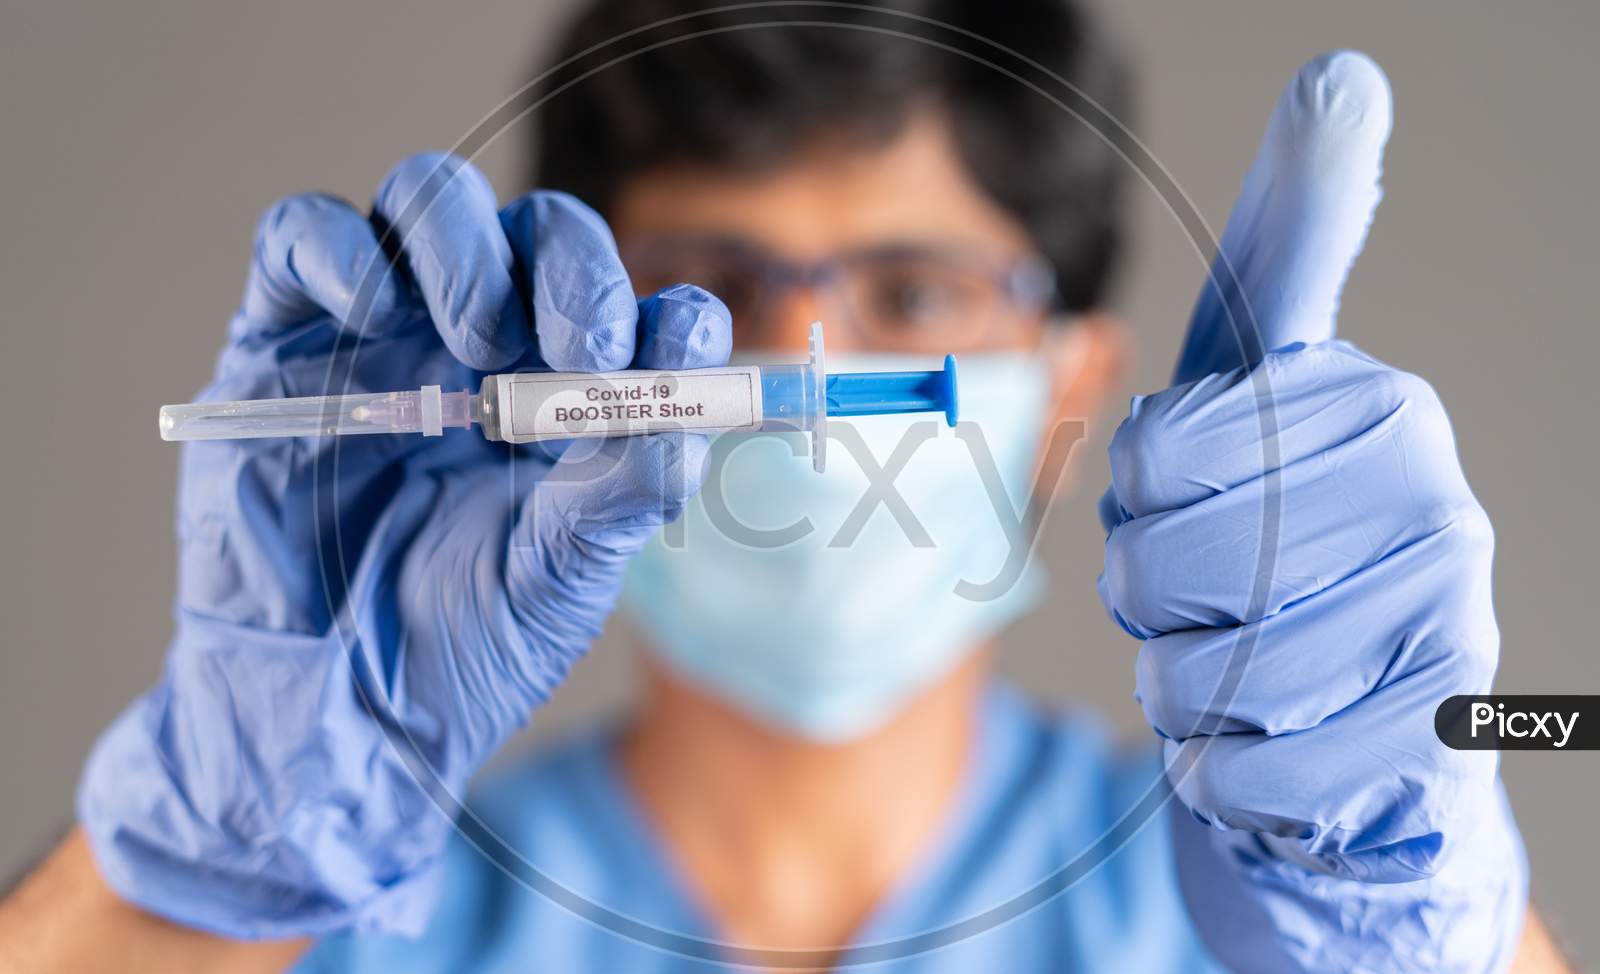 Close Up Of Doctor Hands With Covid-19 Booster Shot Syringe Showing Thumbs Up - Concept Showing Of Recommendation Of 3Rd Dose Vaccination For Immune Weakened People